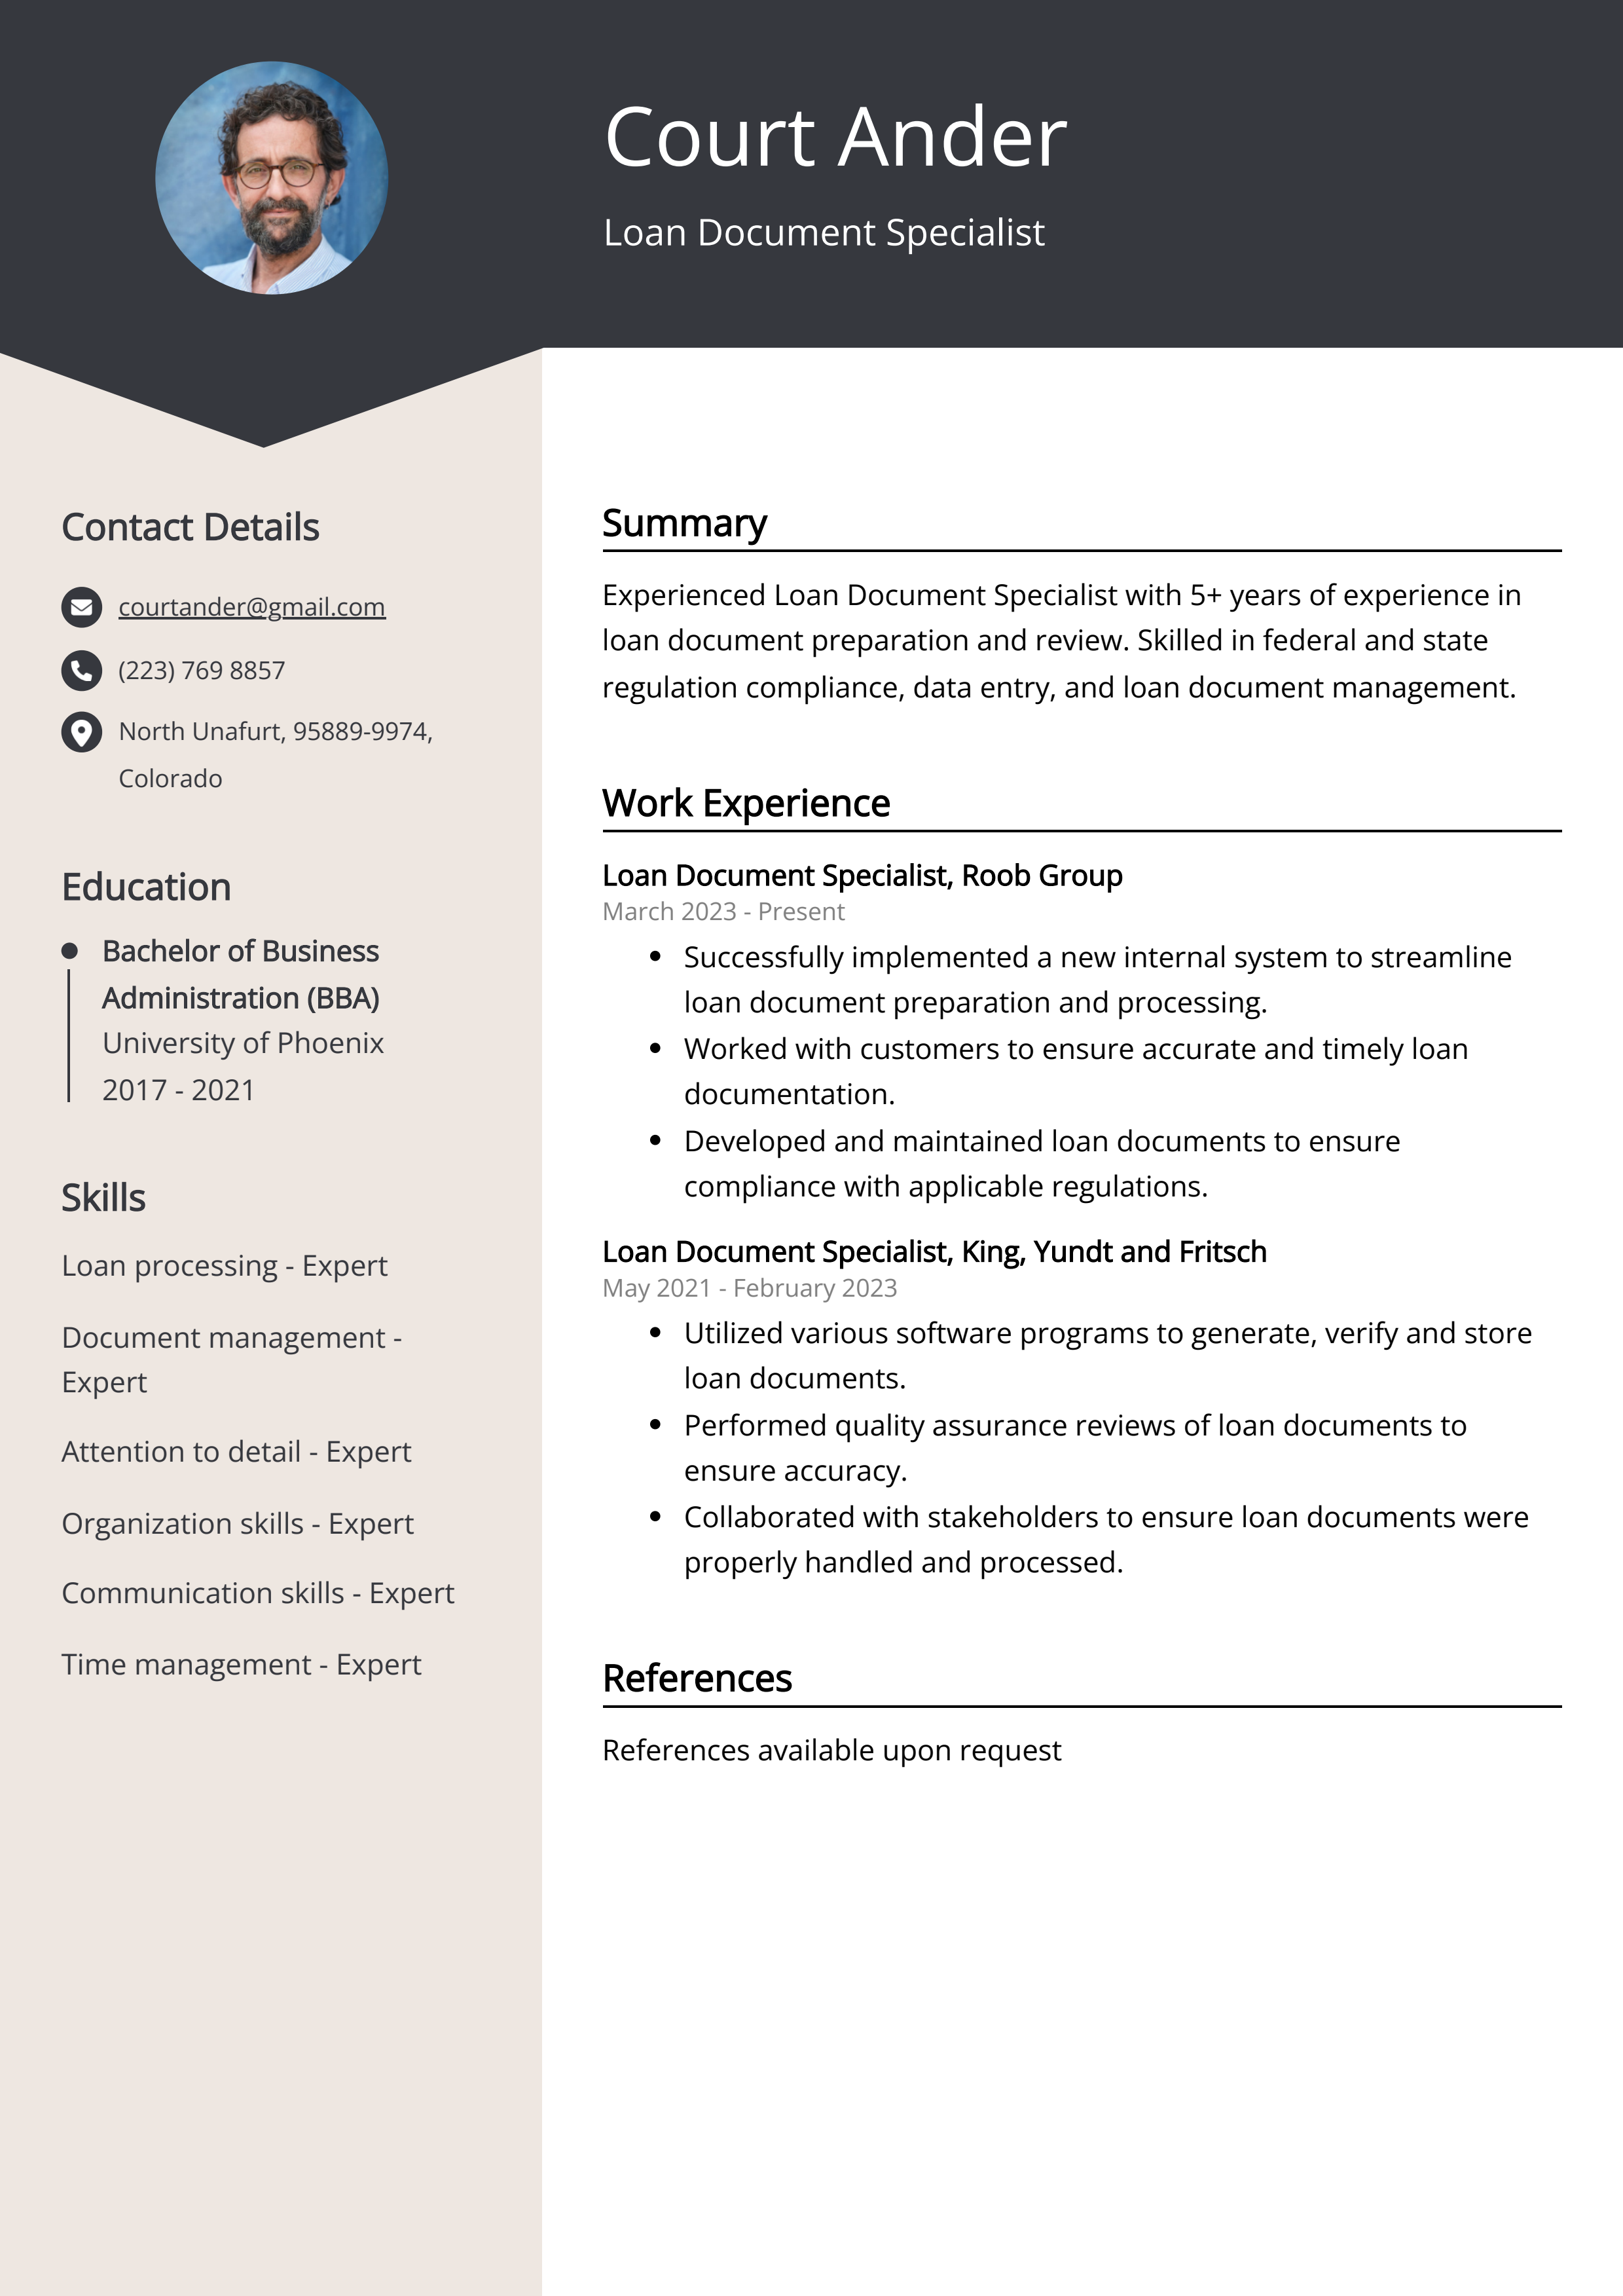 Loan Document Specialist CV Example